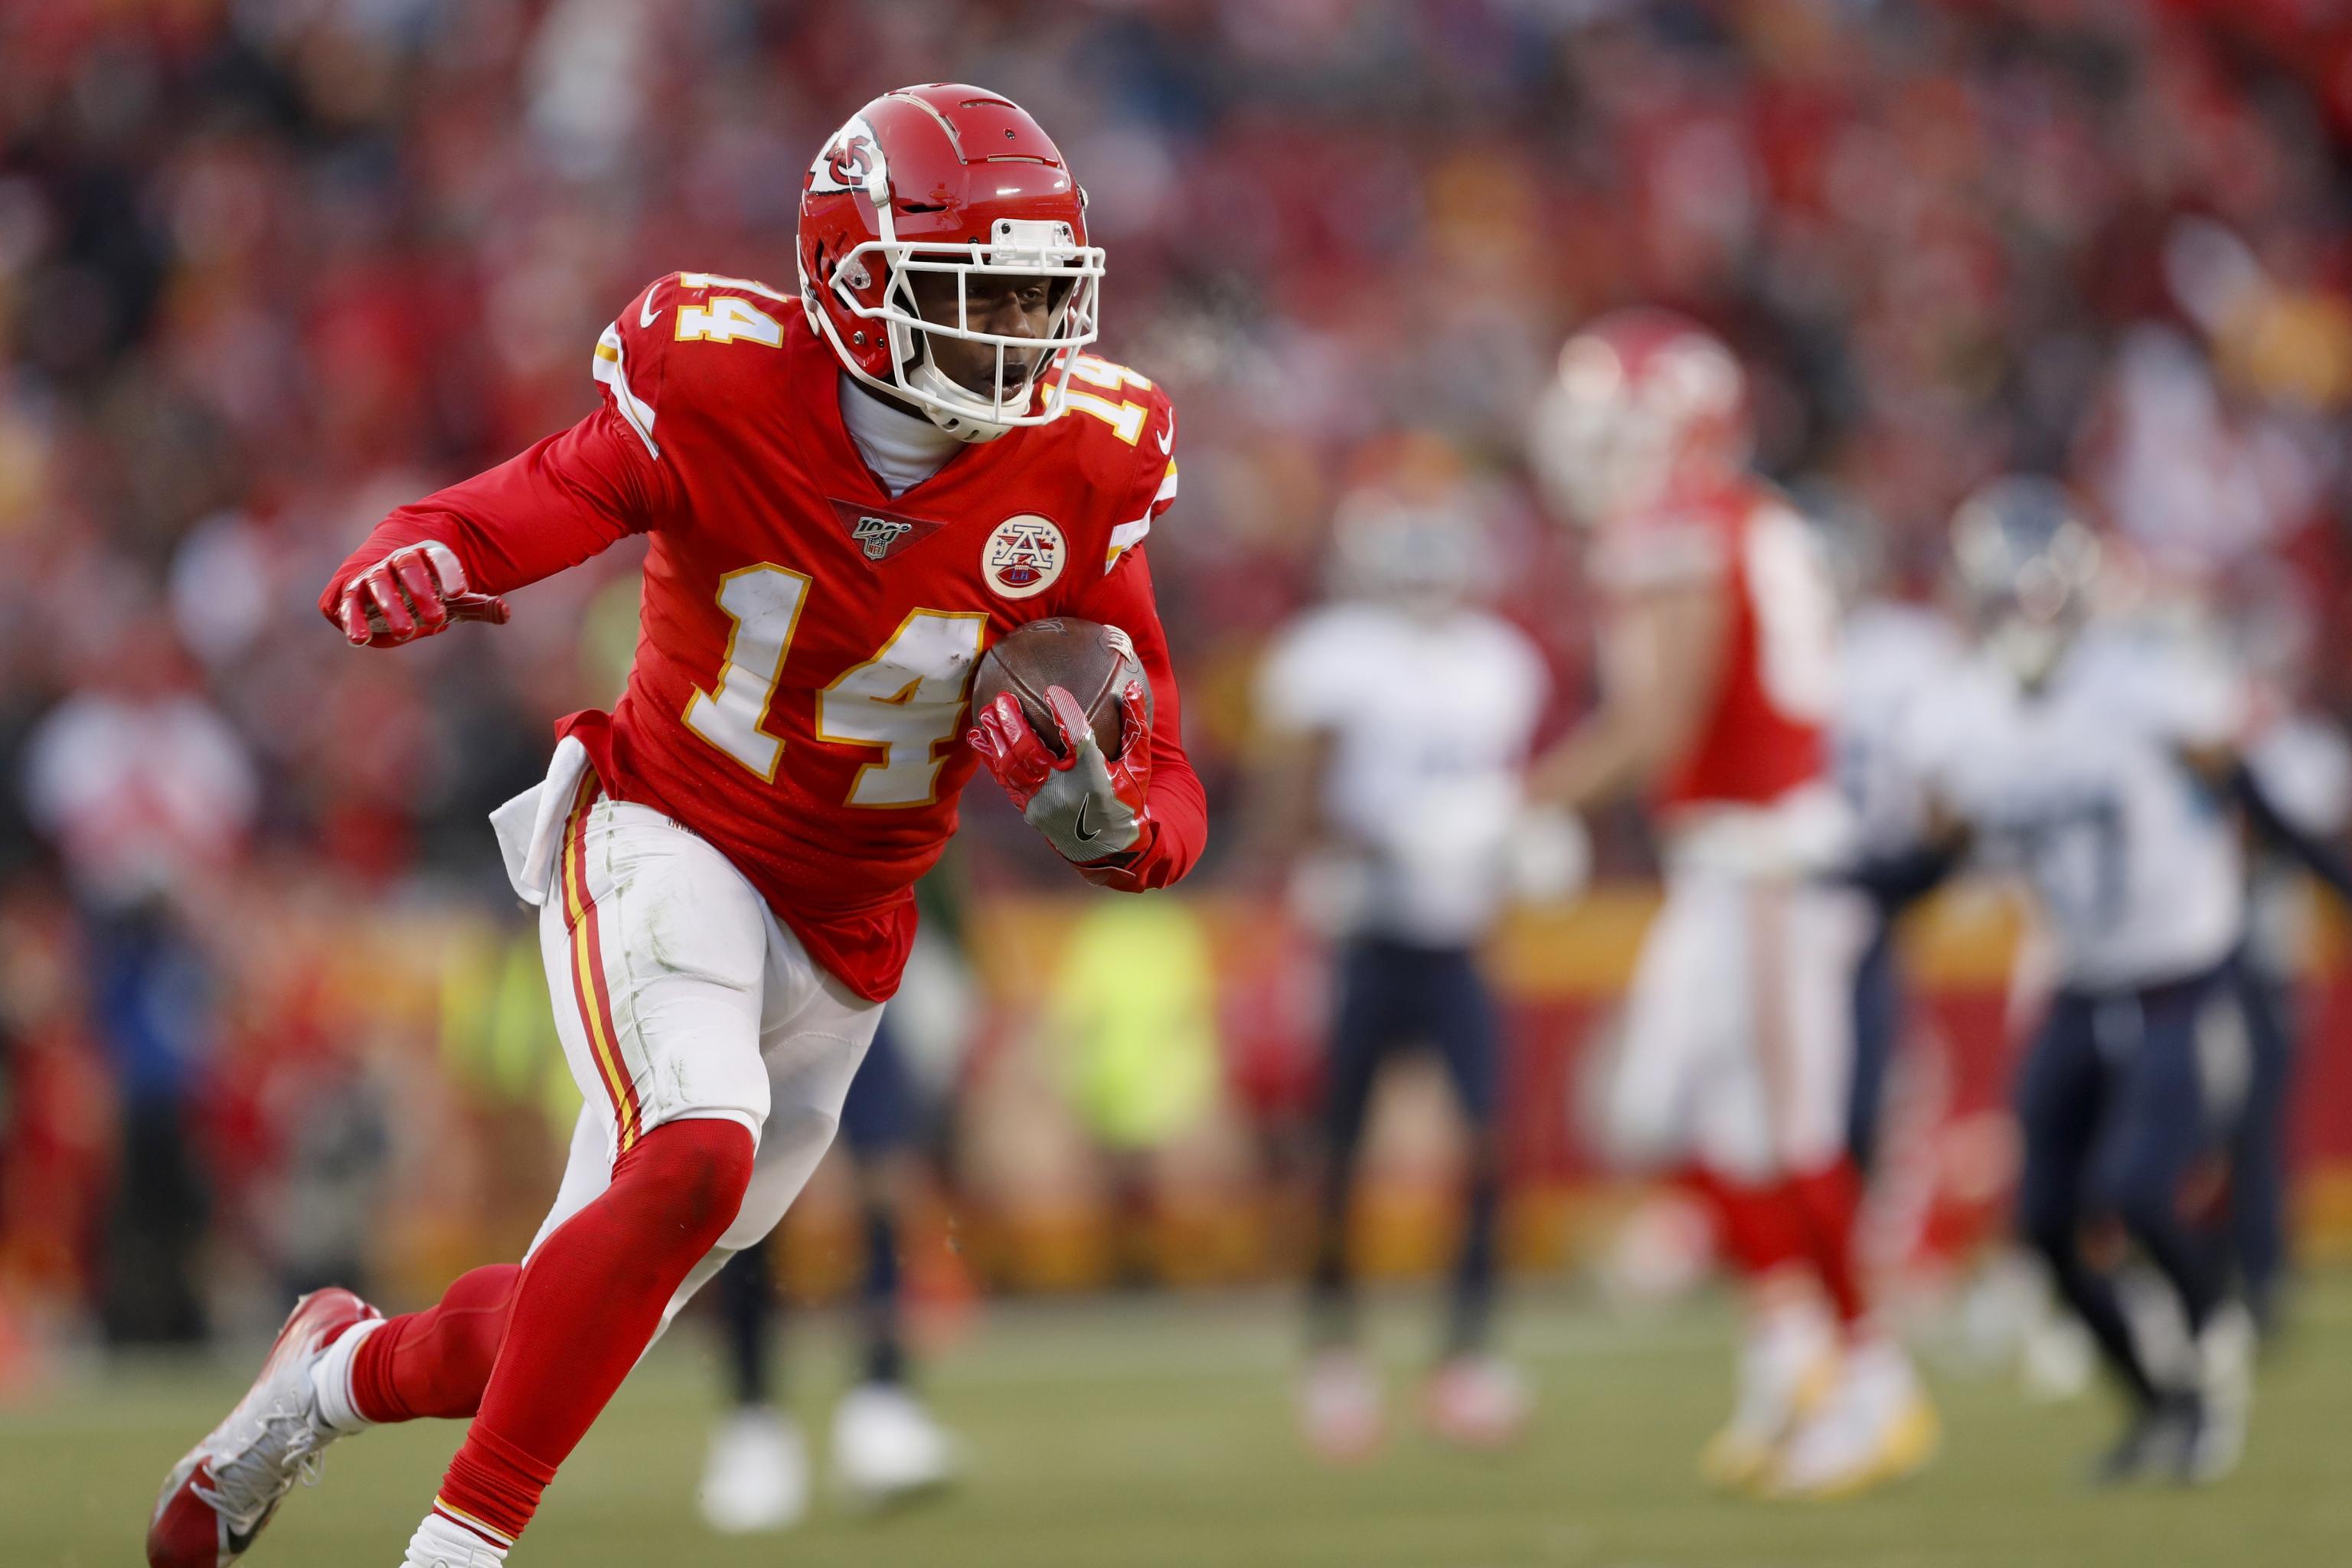 49ers vs. Chiefs: Initial Betting Odds, Favorite, Preview